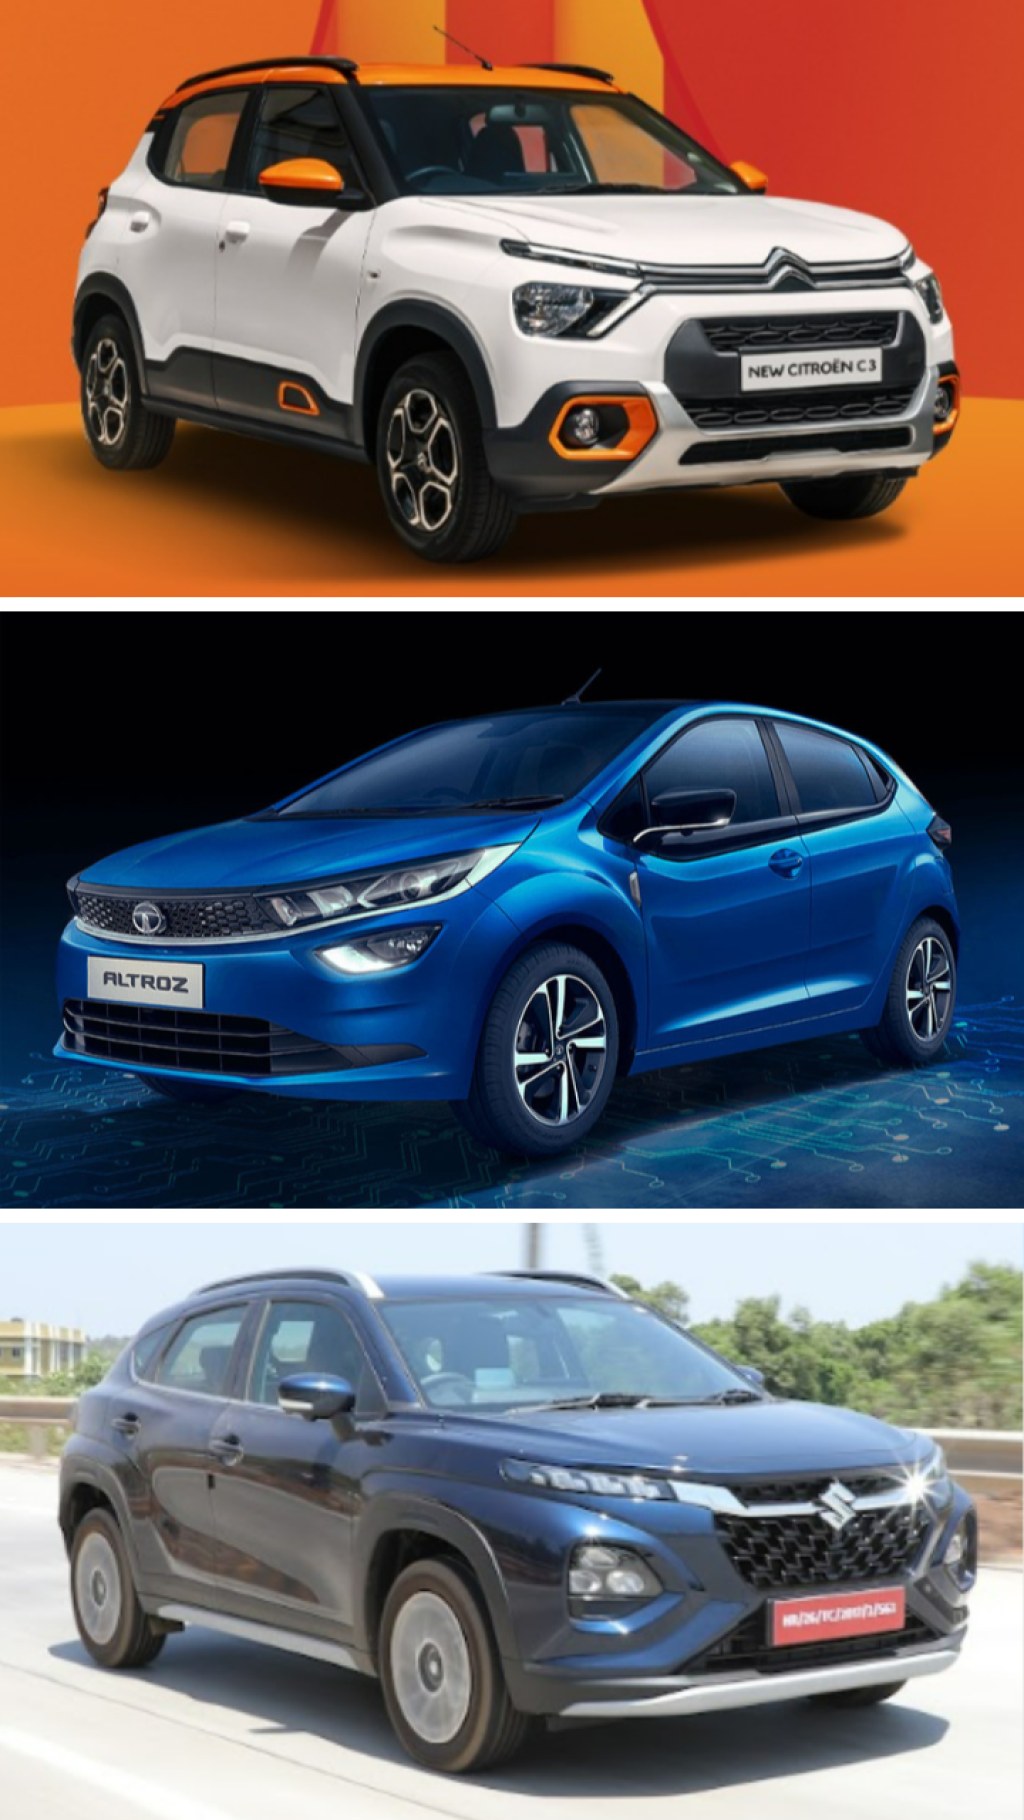 Picture of: Most affordable turbo-petrol cars, SUVs in India in : Citroen